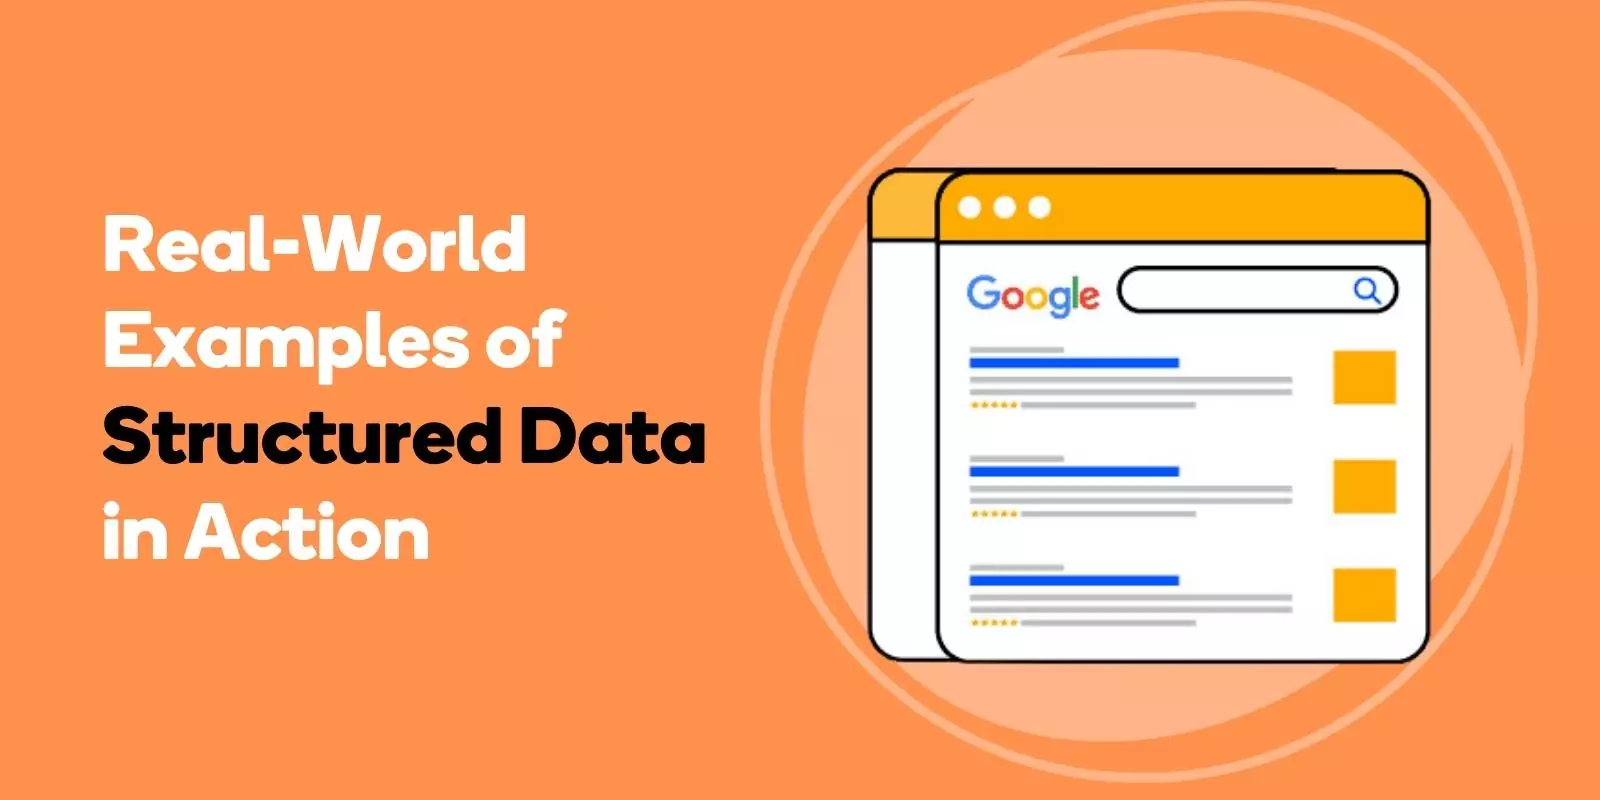 Real-World Examples of Structured Data in Action